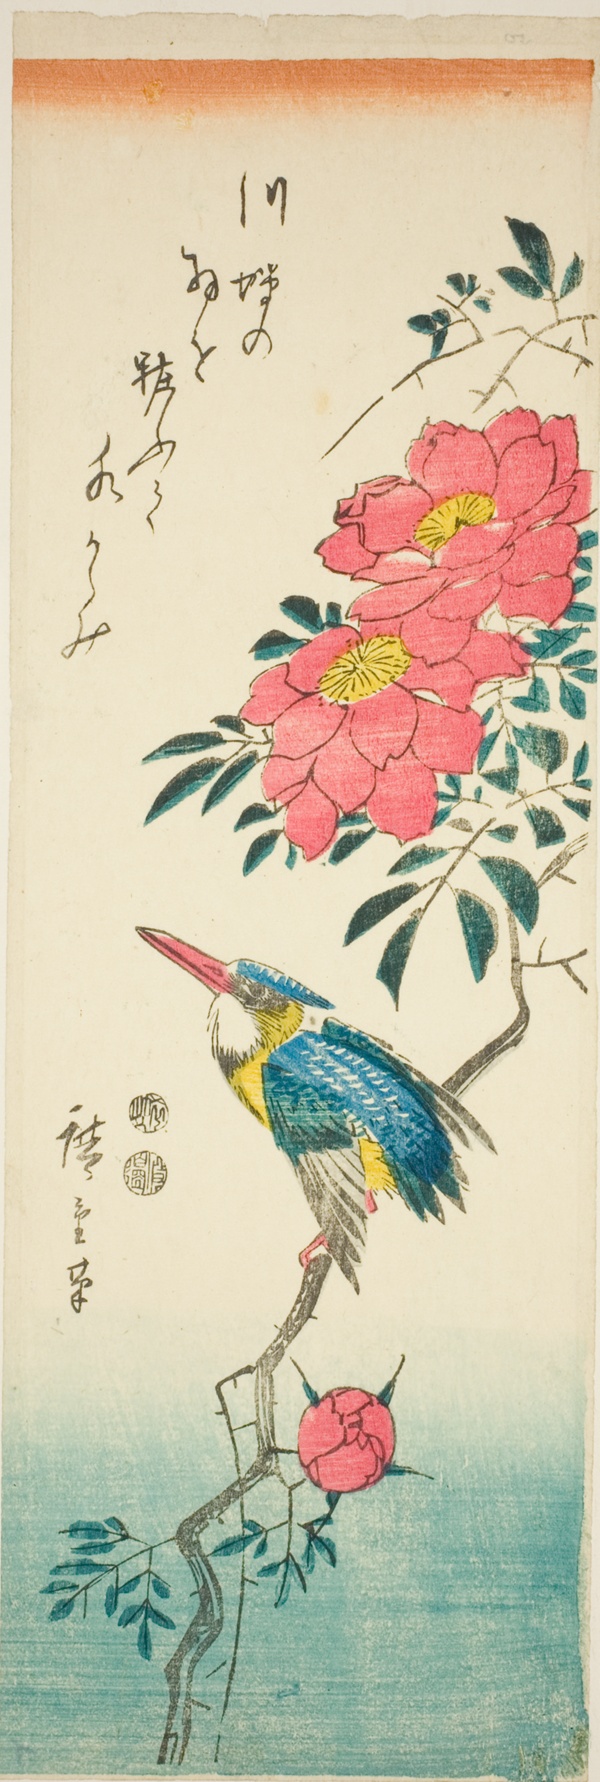 Kingfisher and roses